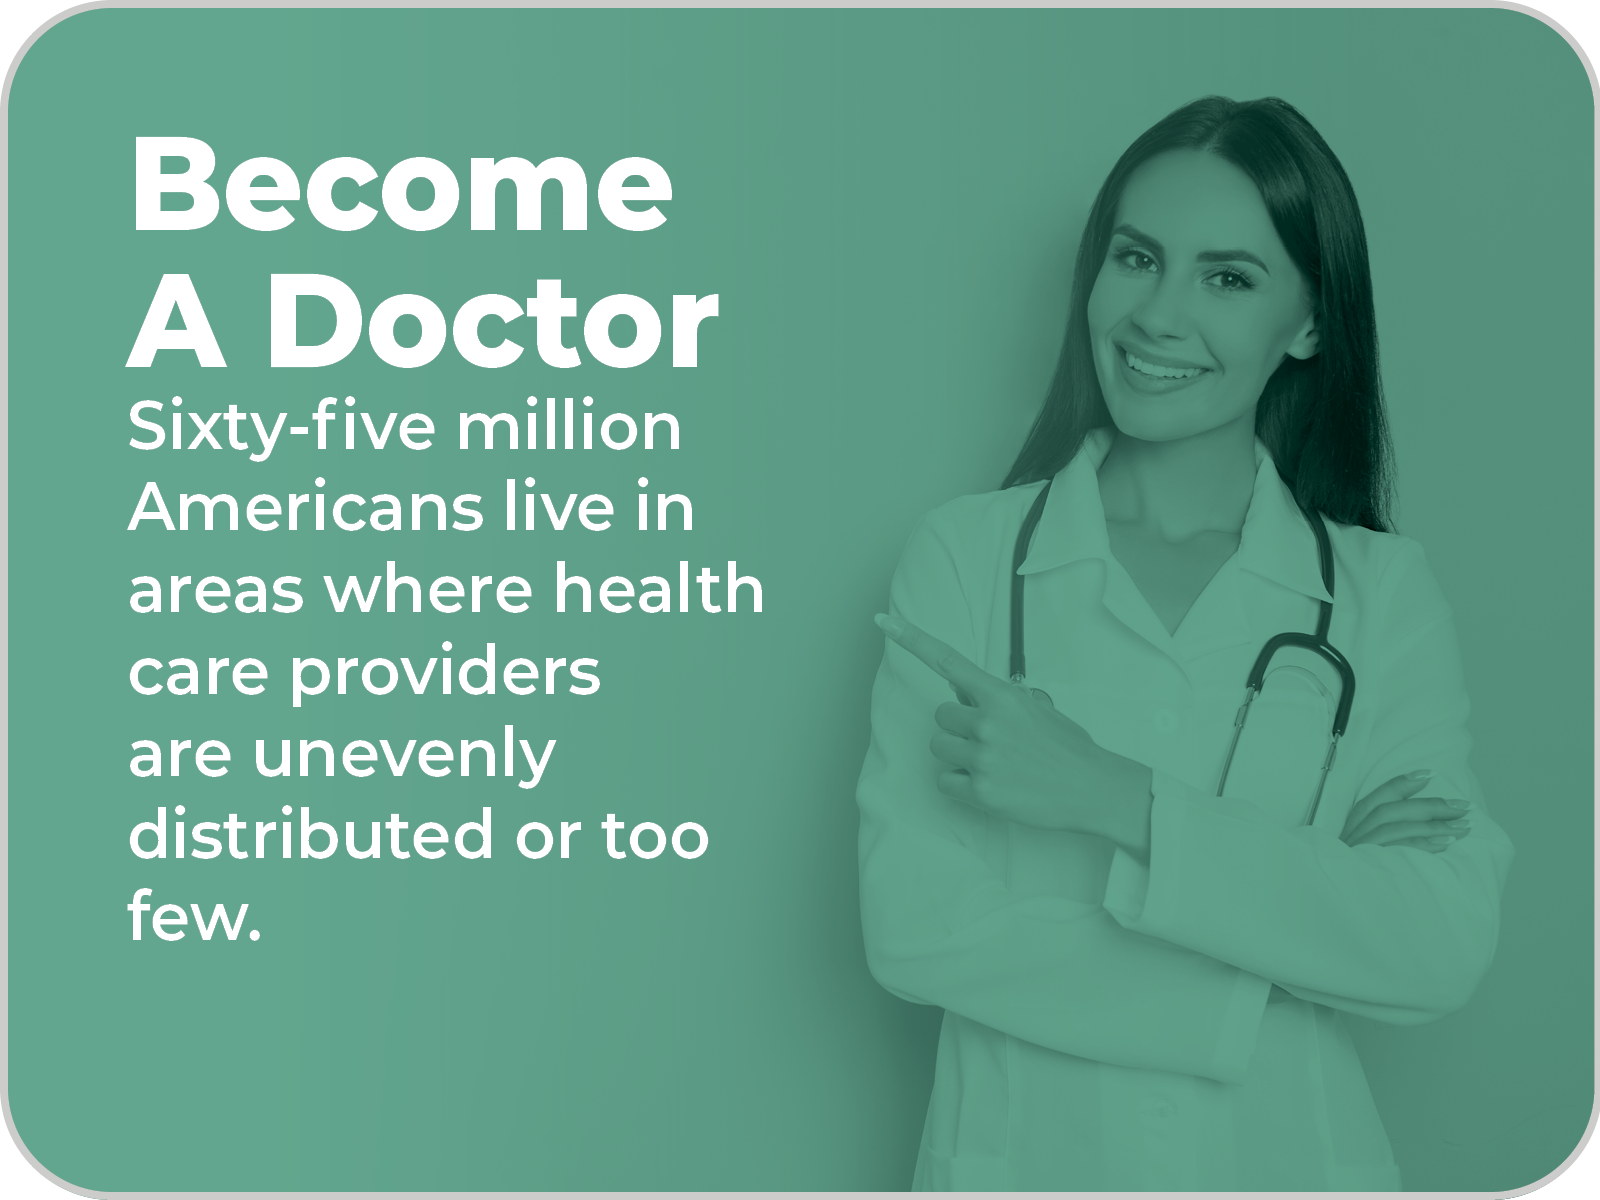 Become a DR.